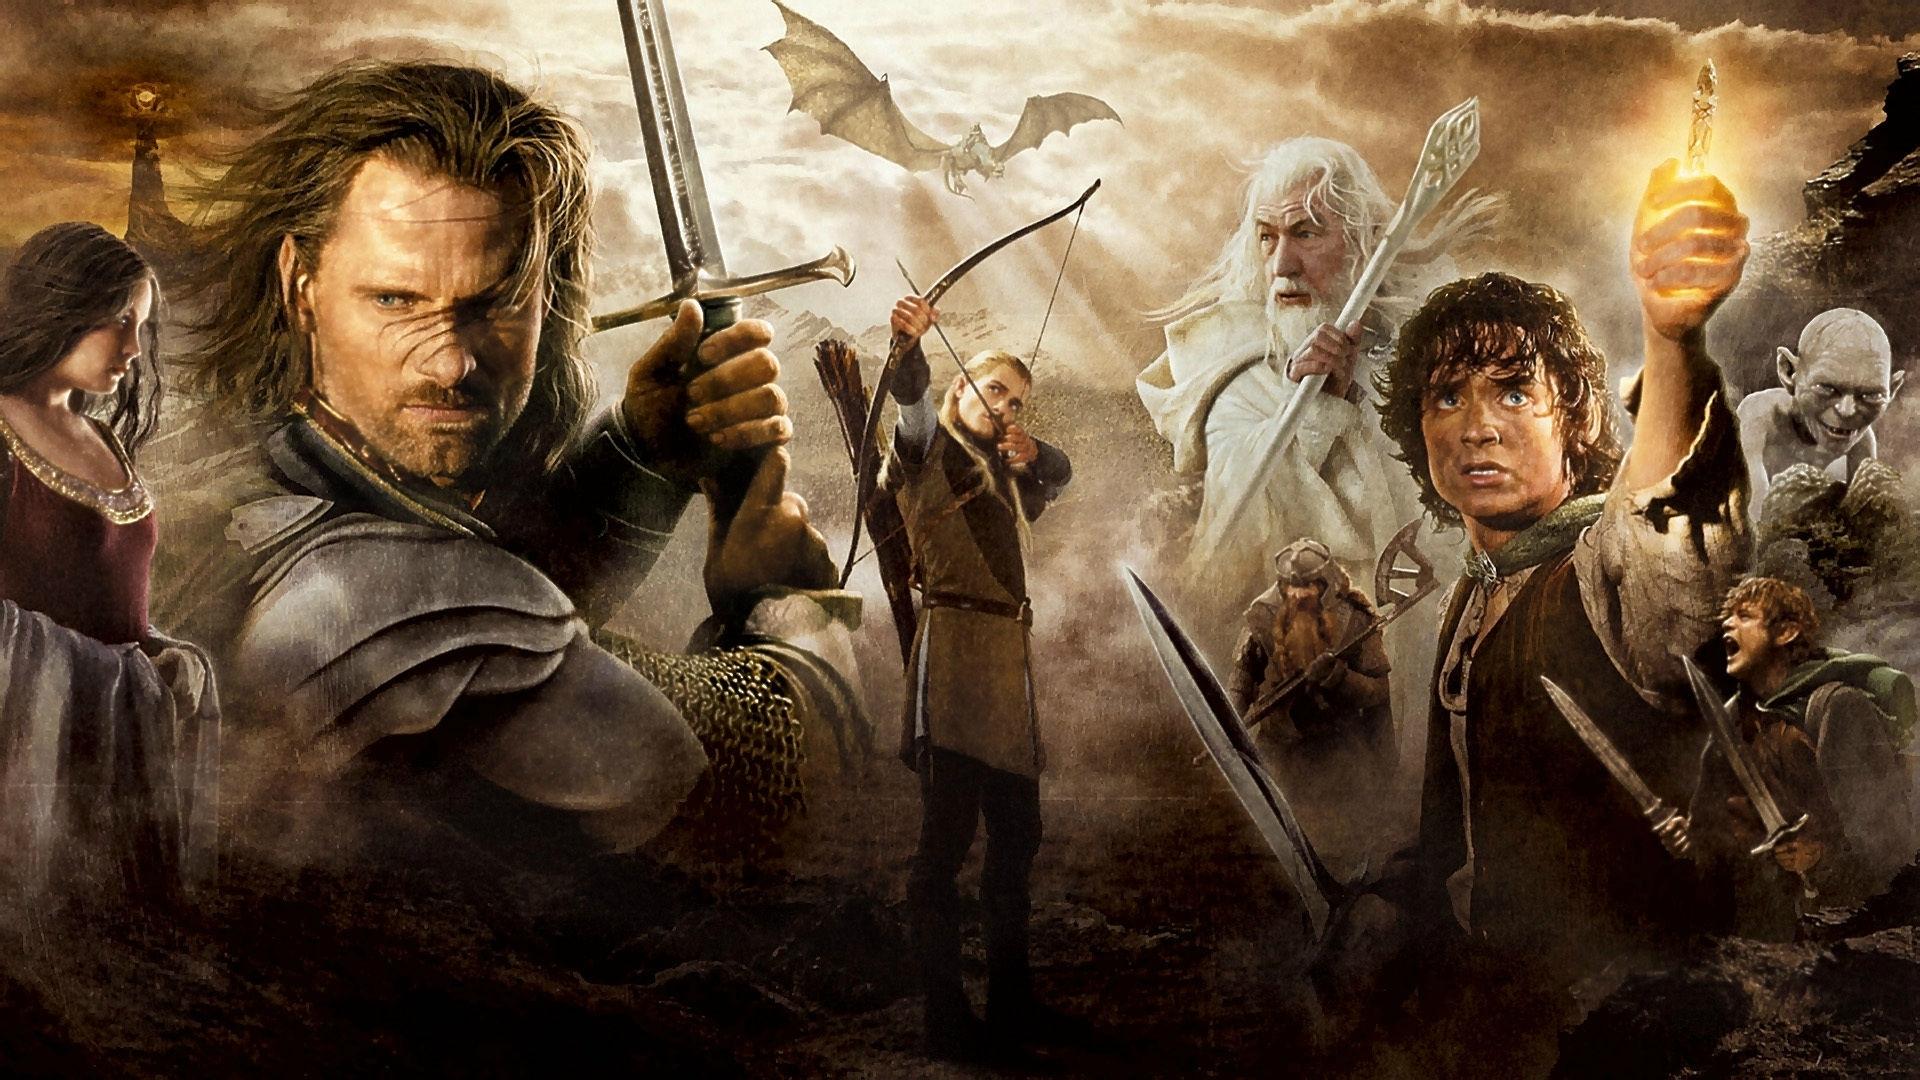 1920 x 1080 · jpeg - 10 Best Lord Of The Rings Hd FULL HD 19201080 For PC Desktop 2020